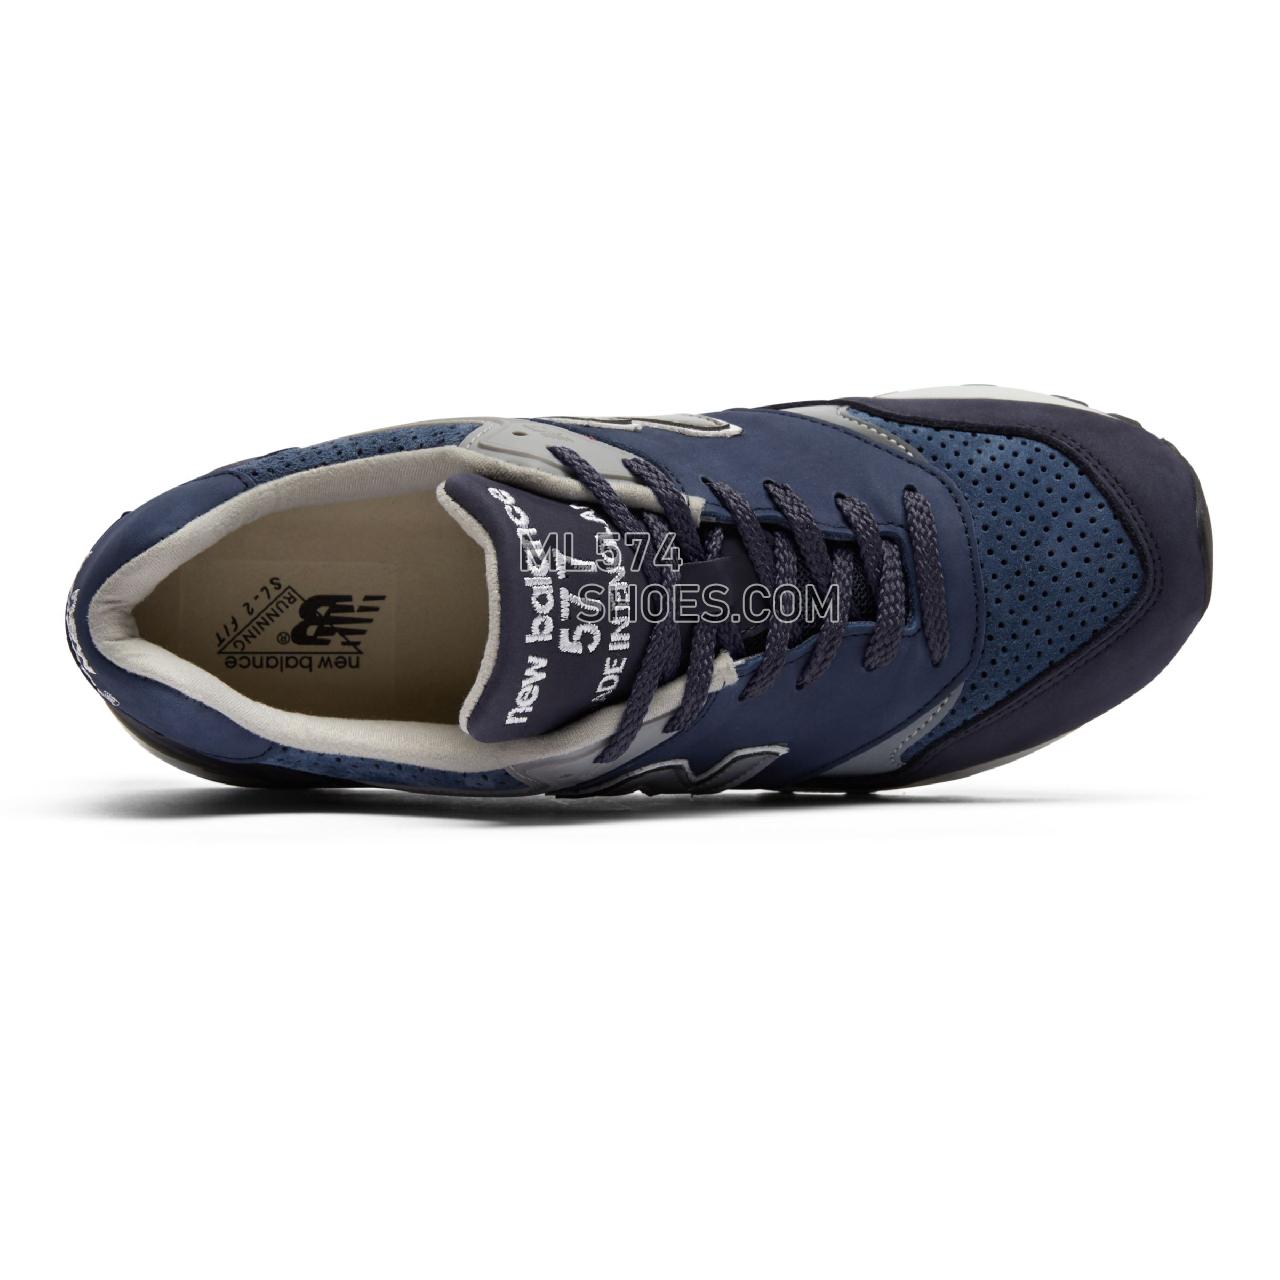 New Balance Made in UK 577 - Men's Made in UK 577 Classic - Navy with Blue and Grey - M577NVT